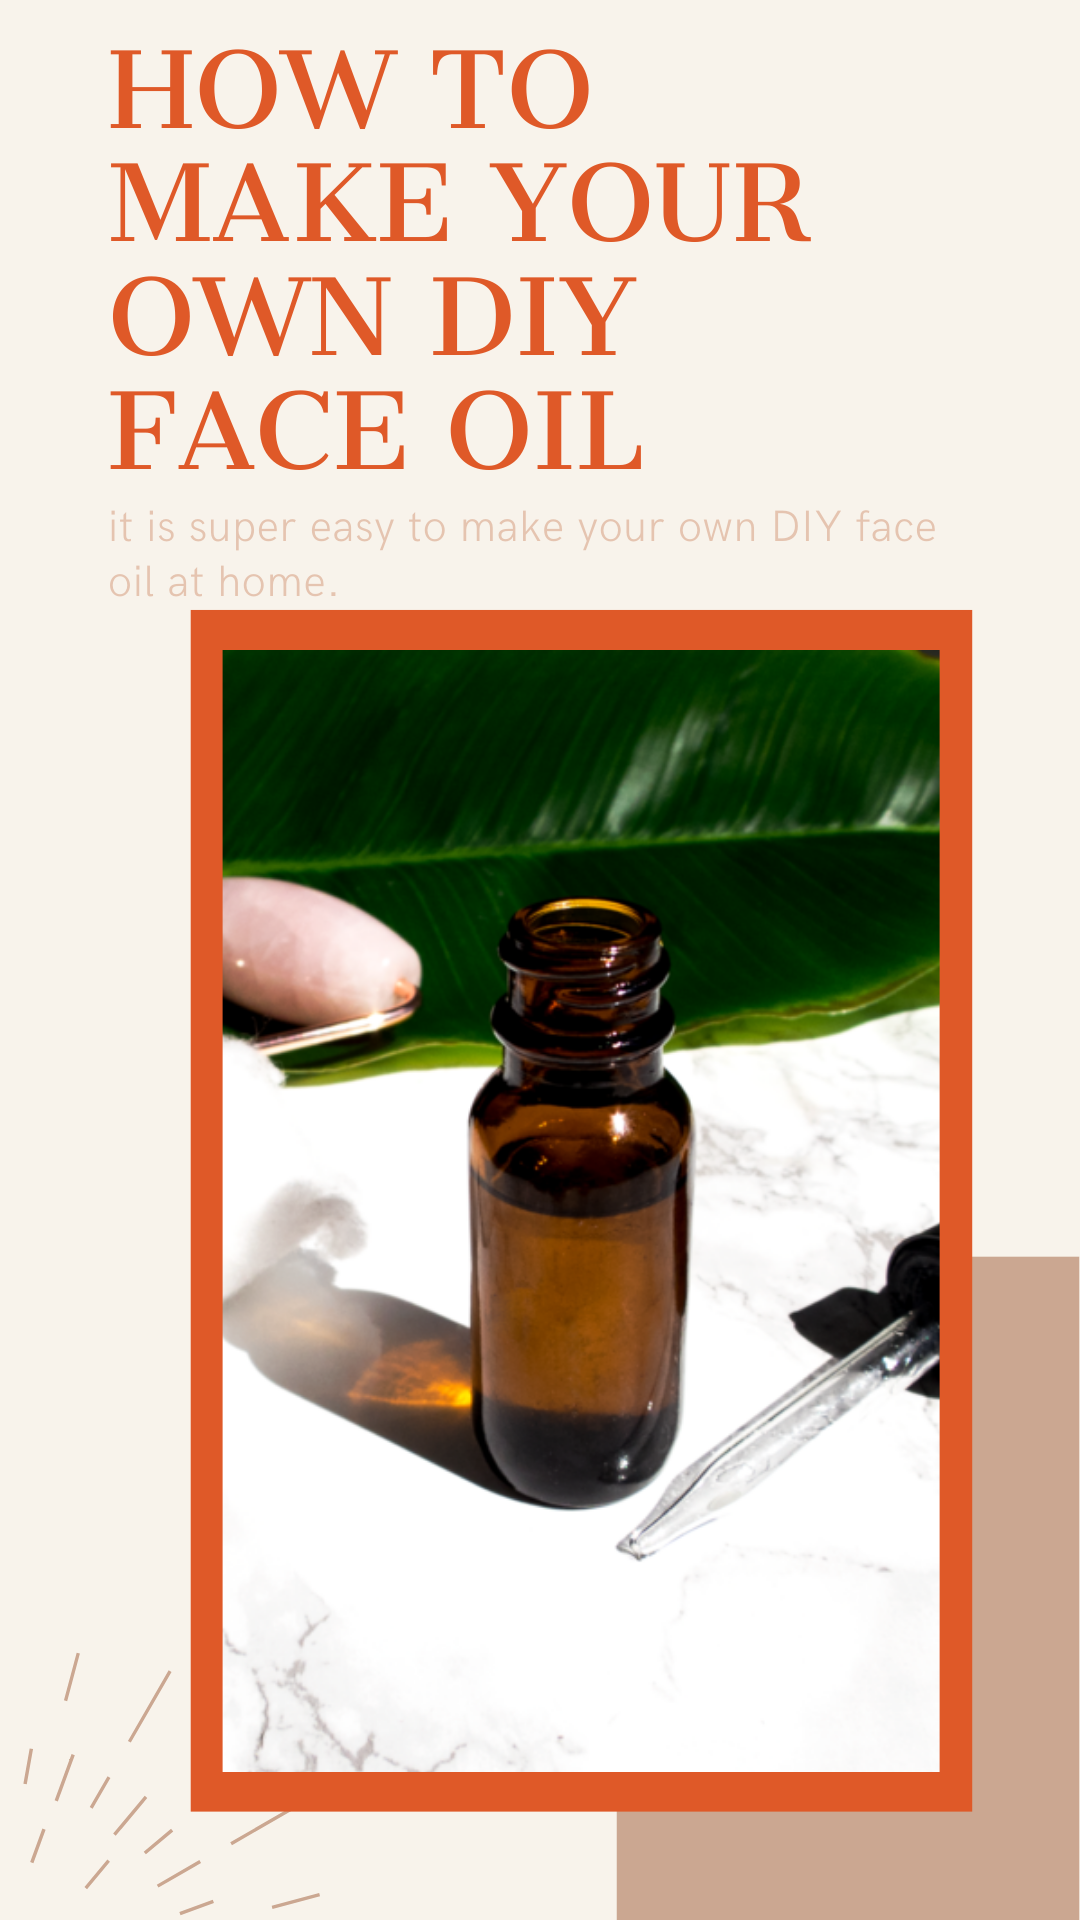 How to Make Your Own DIY Face Oil